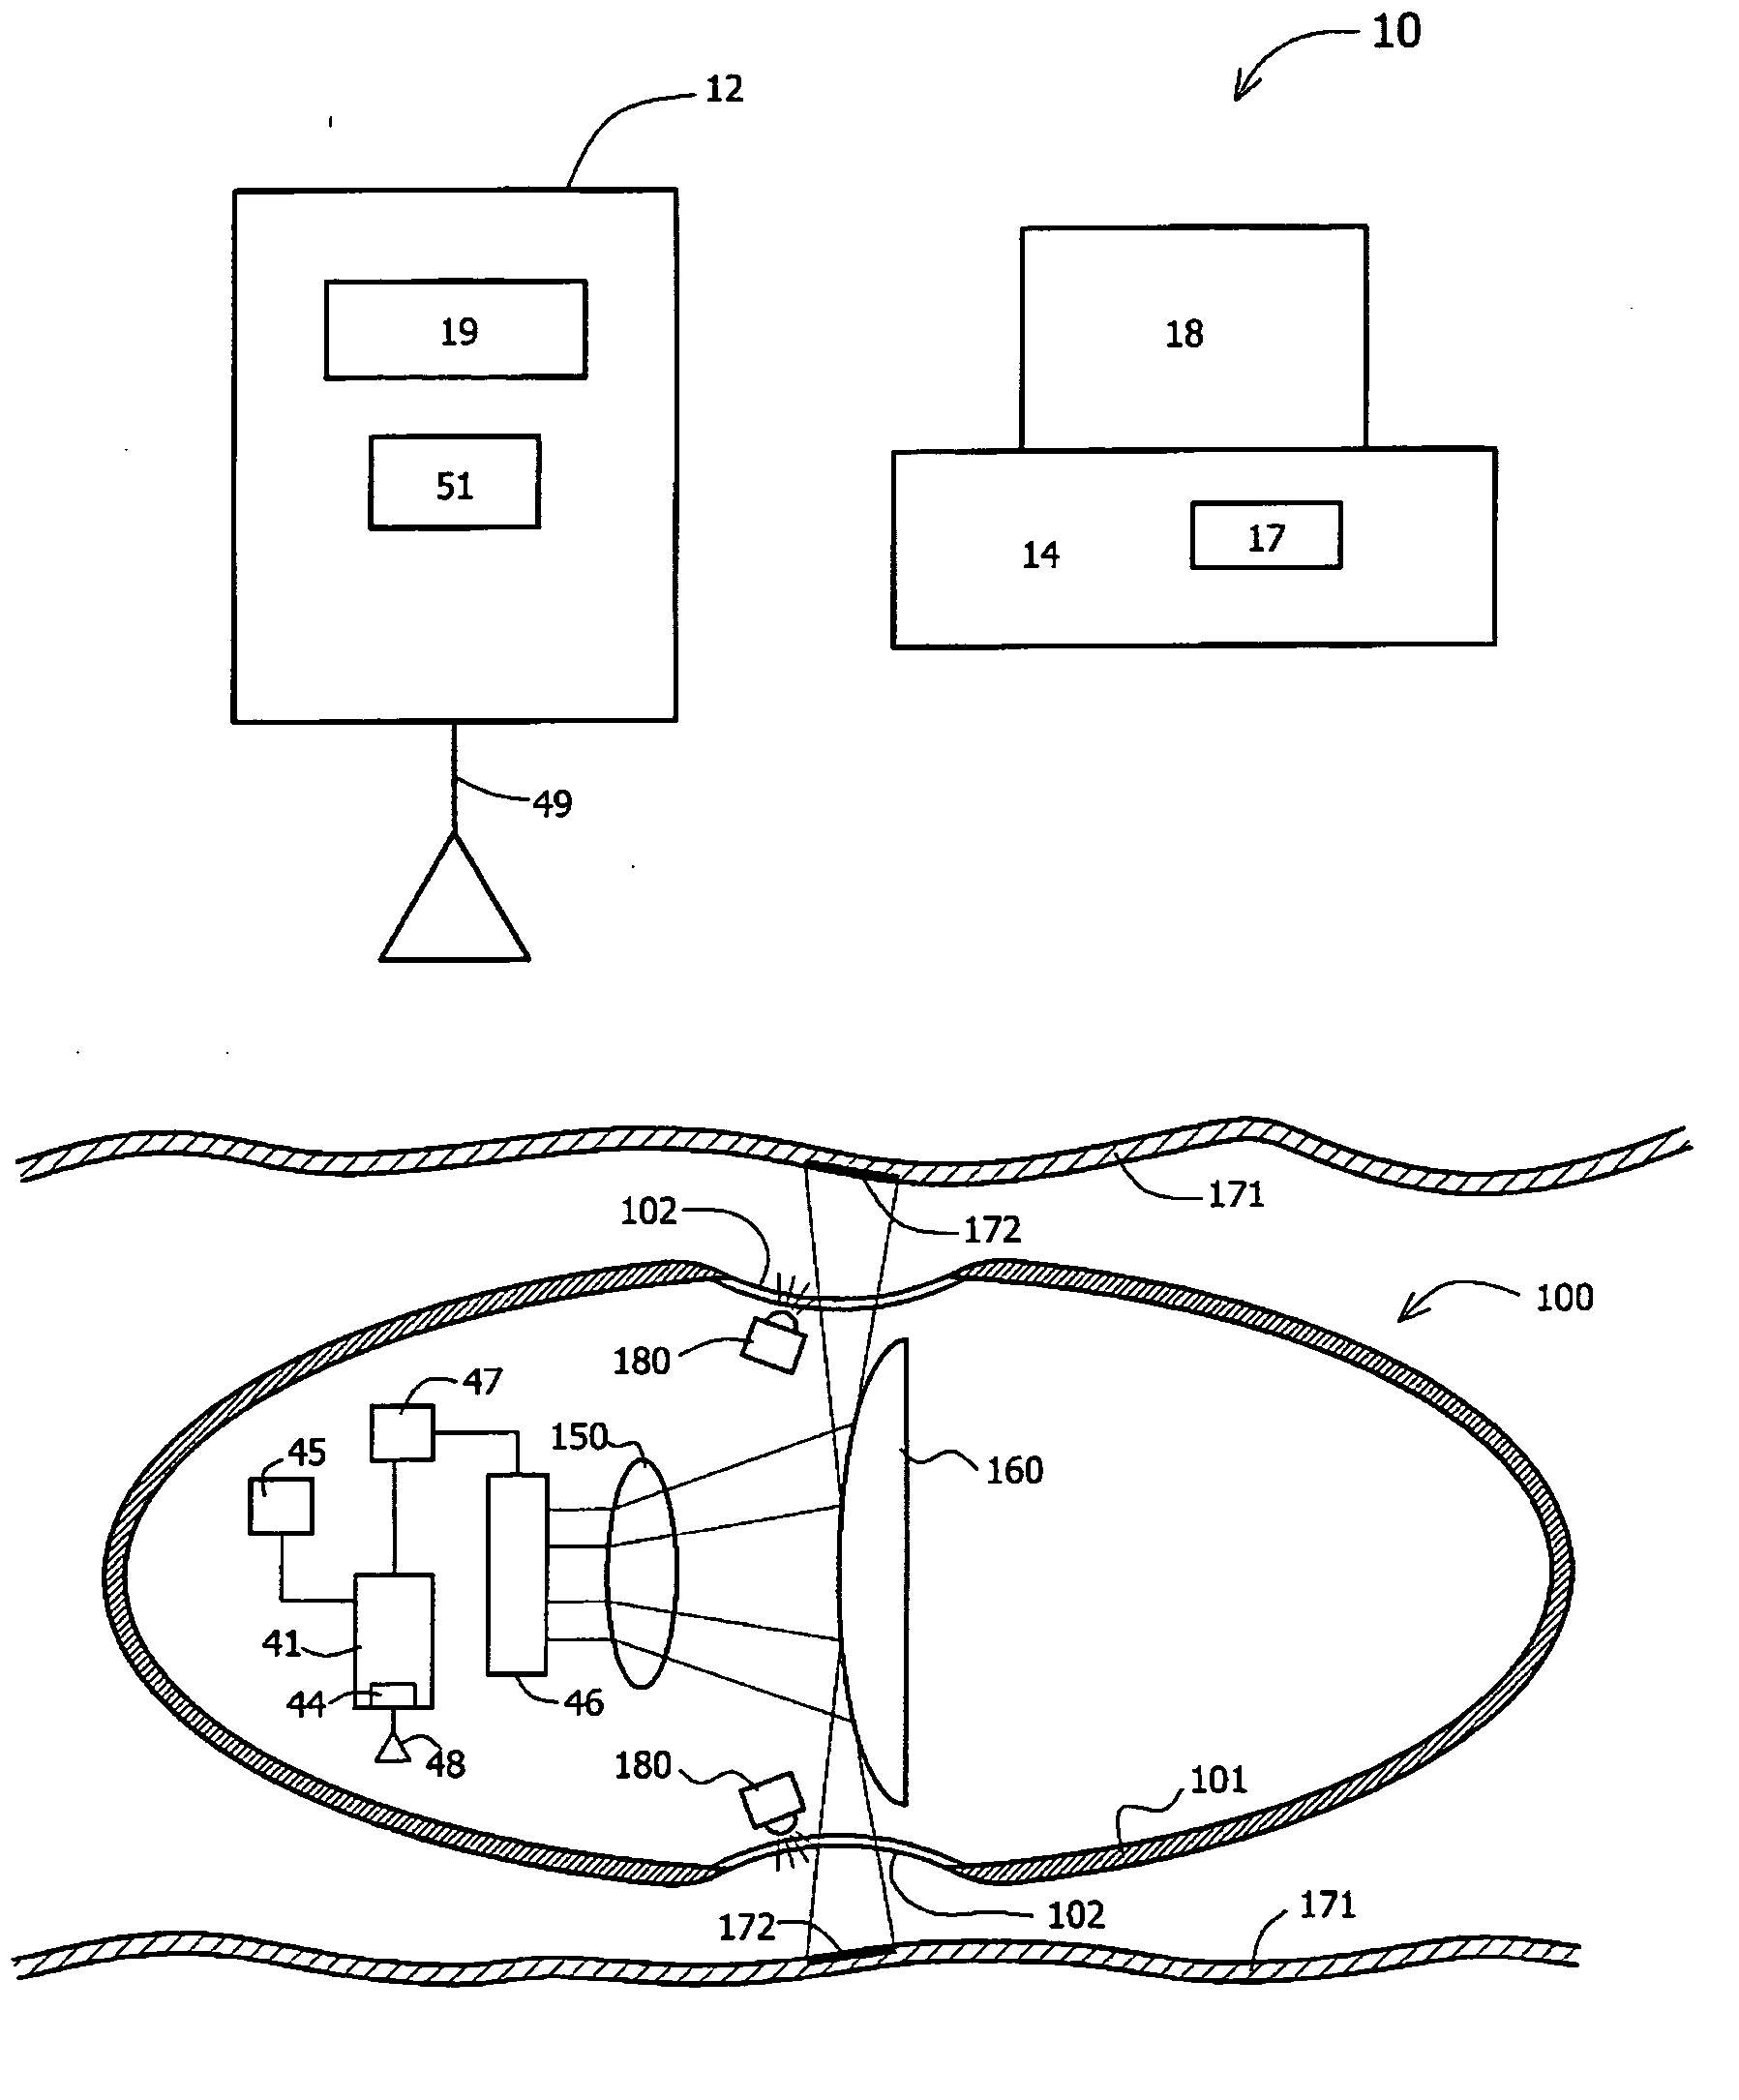 Device, system, and method for reducing image data captured in-vivo